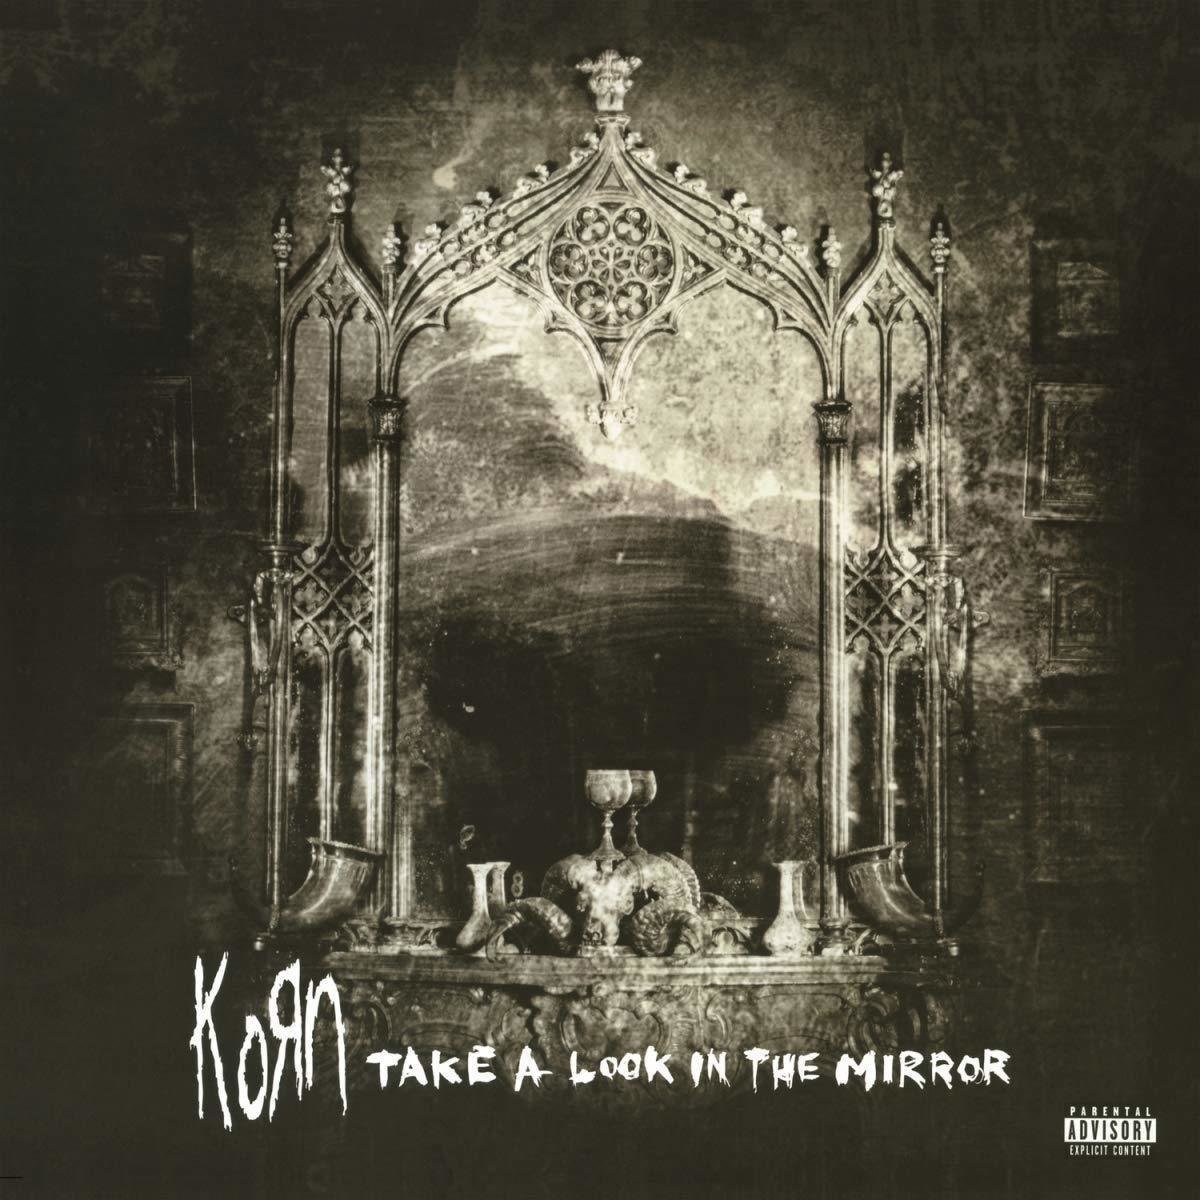 Vinyl Record Korn Take a Look In the Mirror (2 LP)